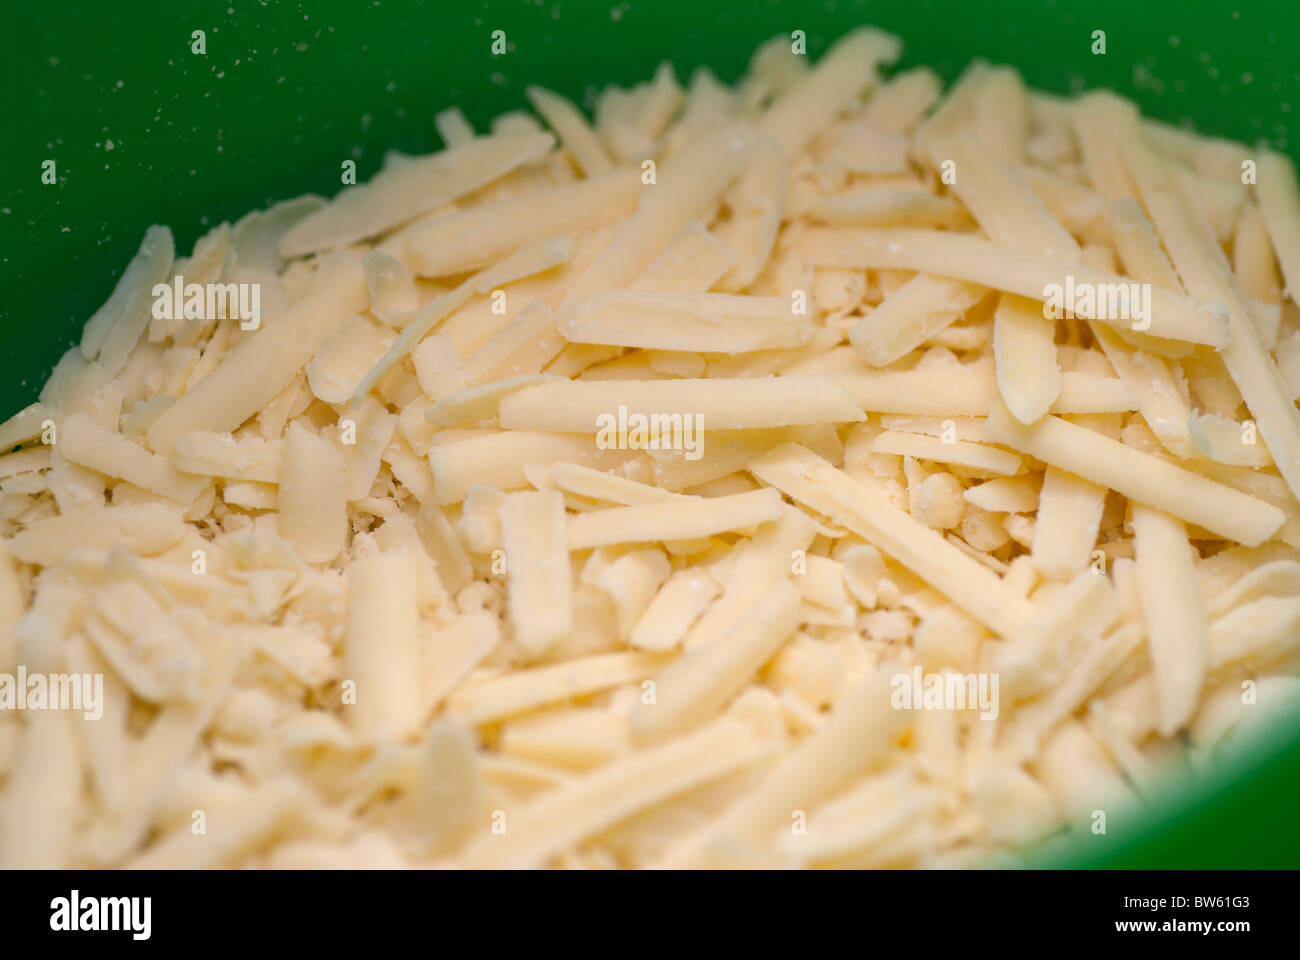 https://c8.alamy.com/comp/BW61G3/grated-cheese-in-a-container-BW61G3.jpg